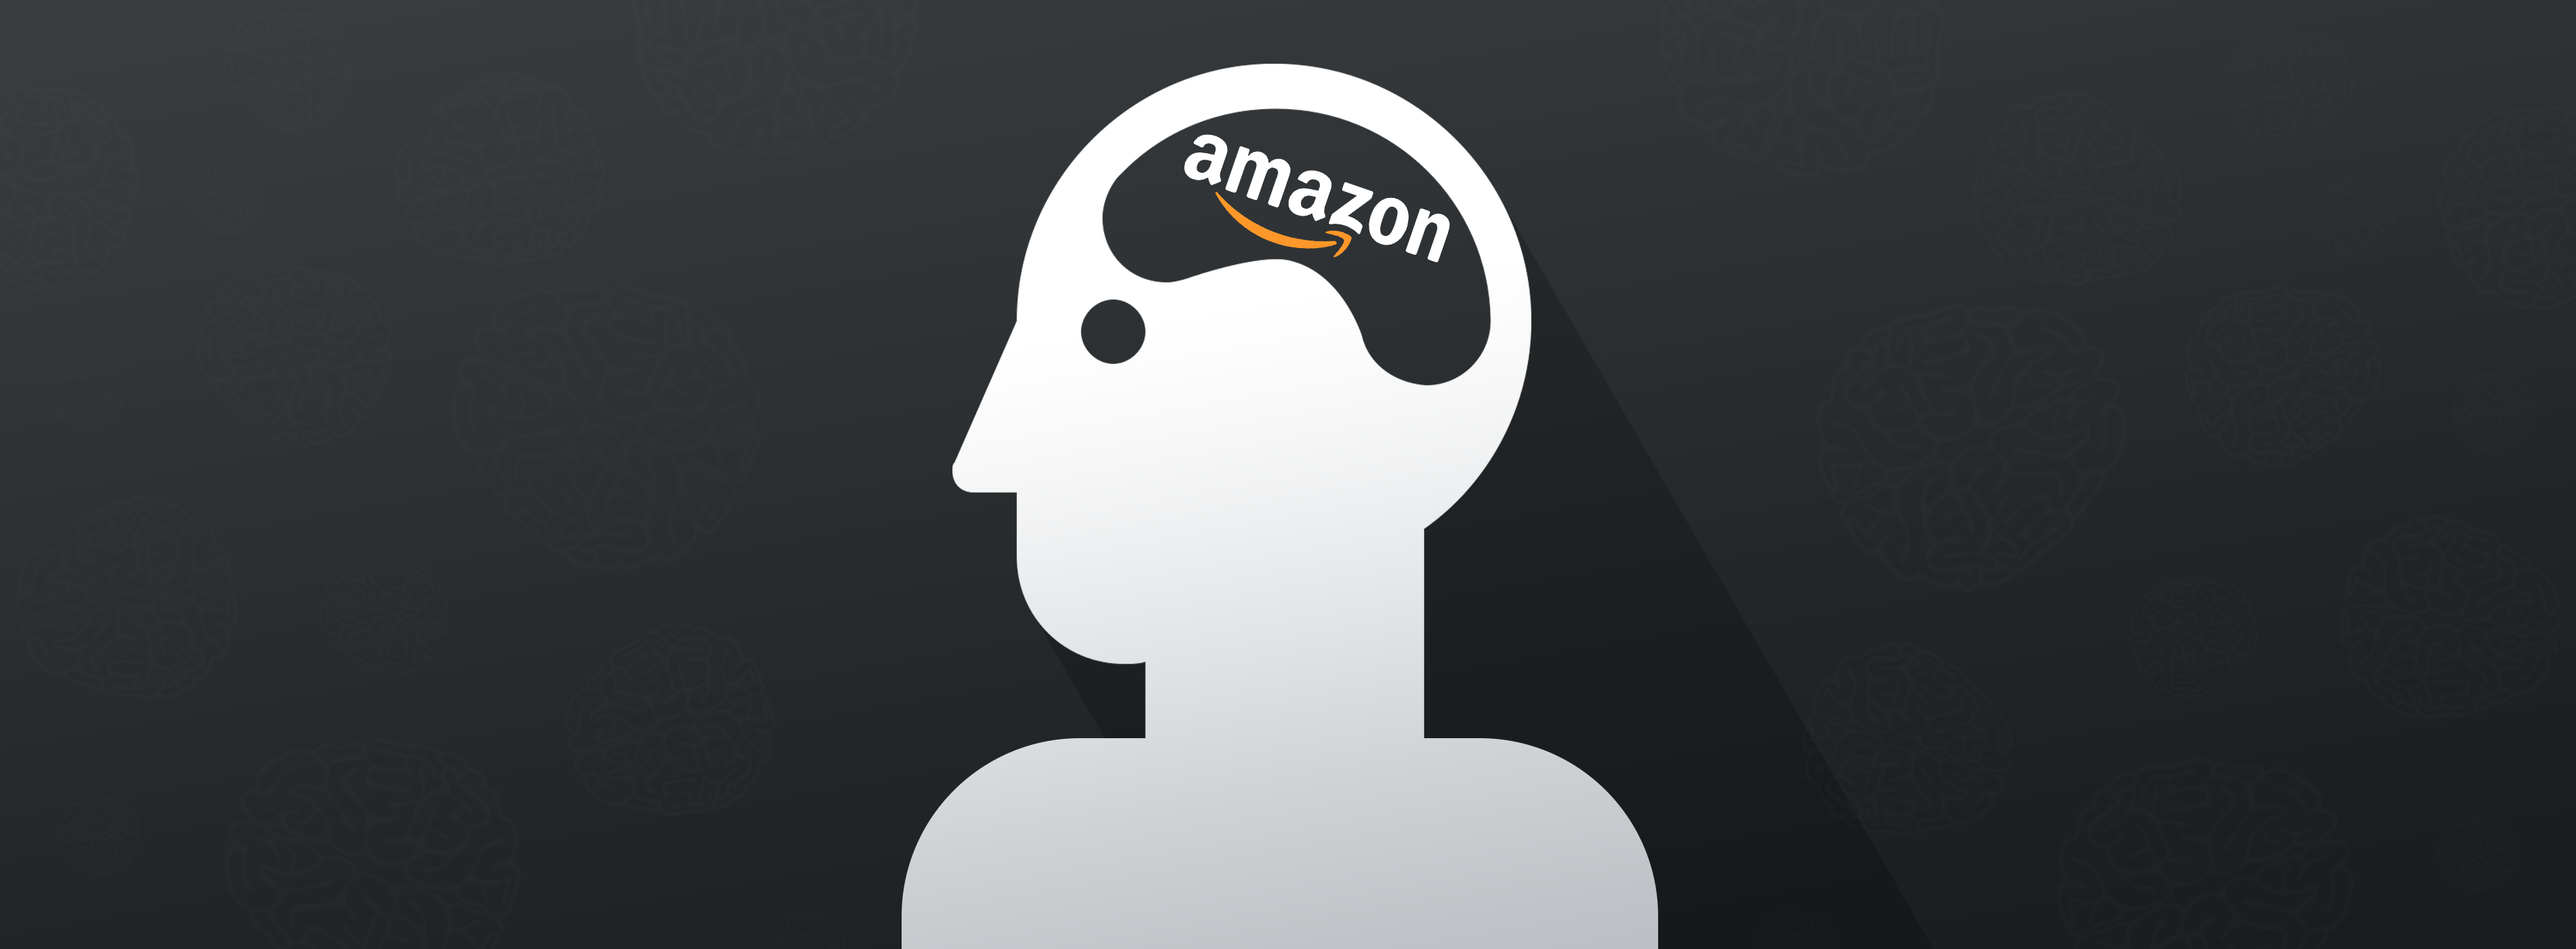 How Amazon Uses Psychology to Drive Sales